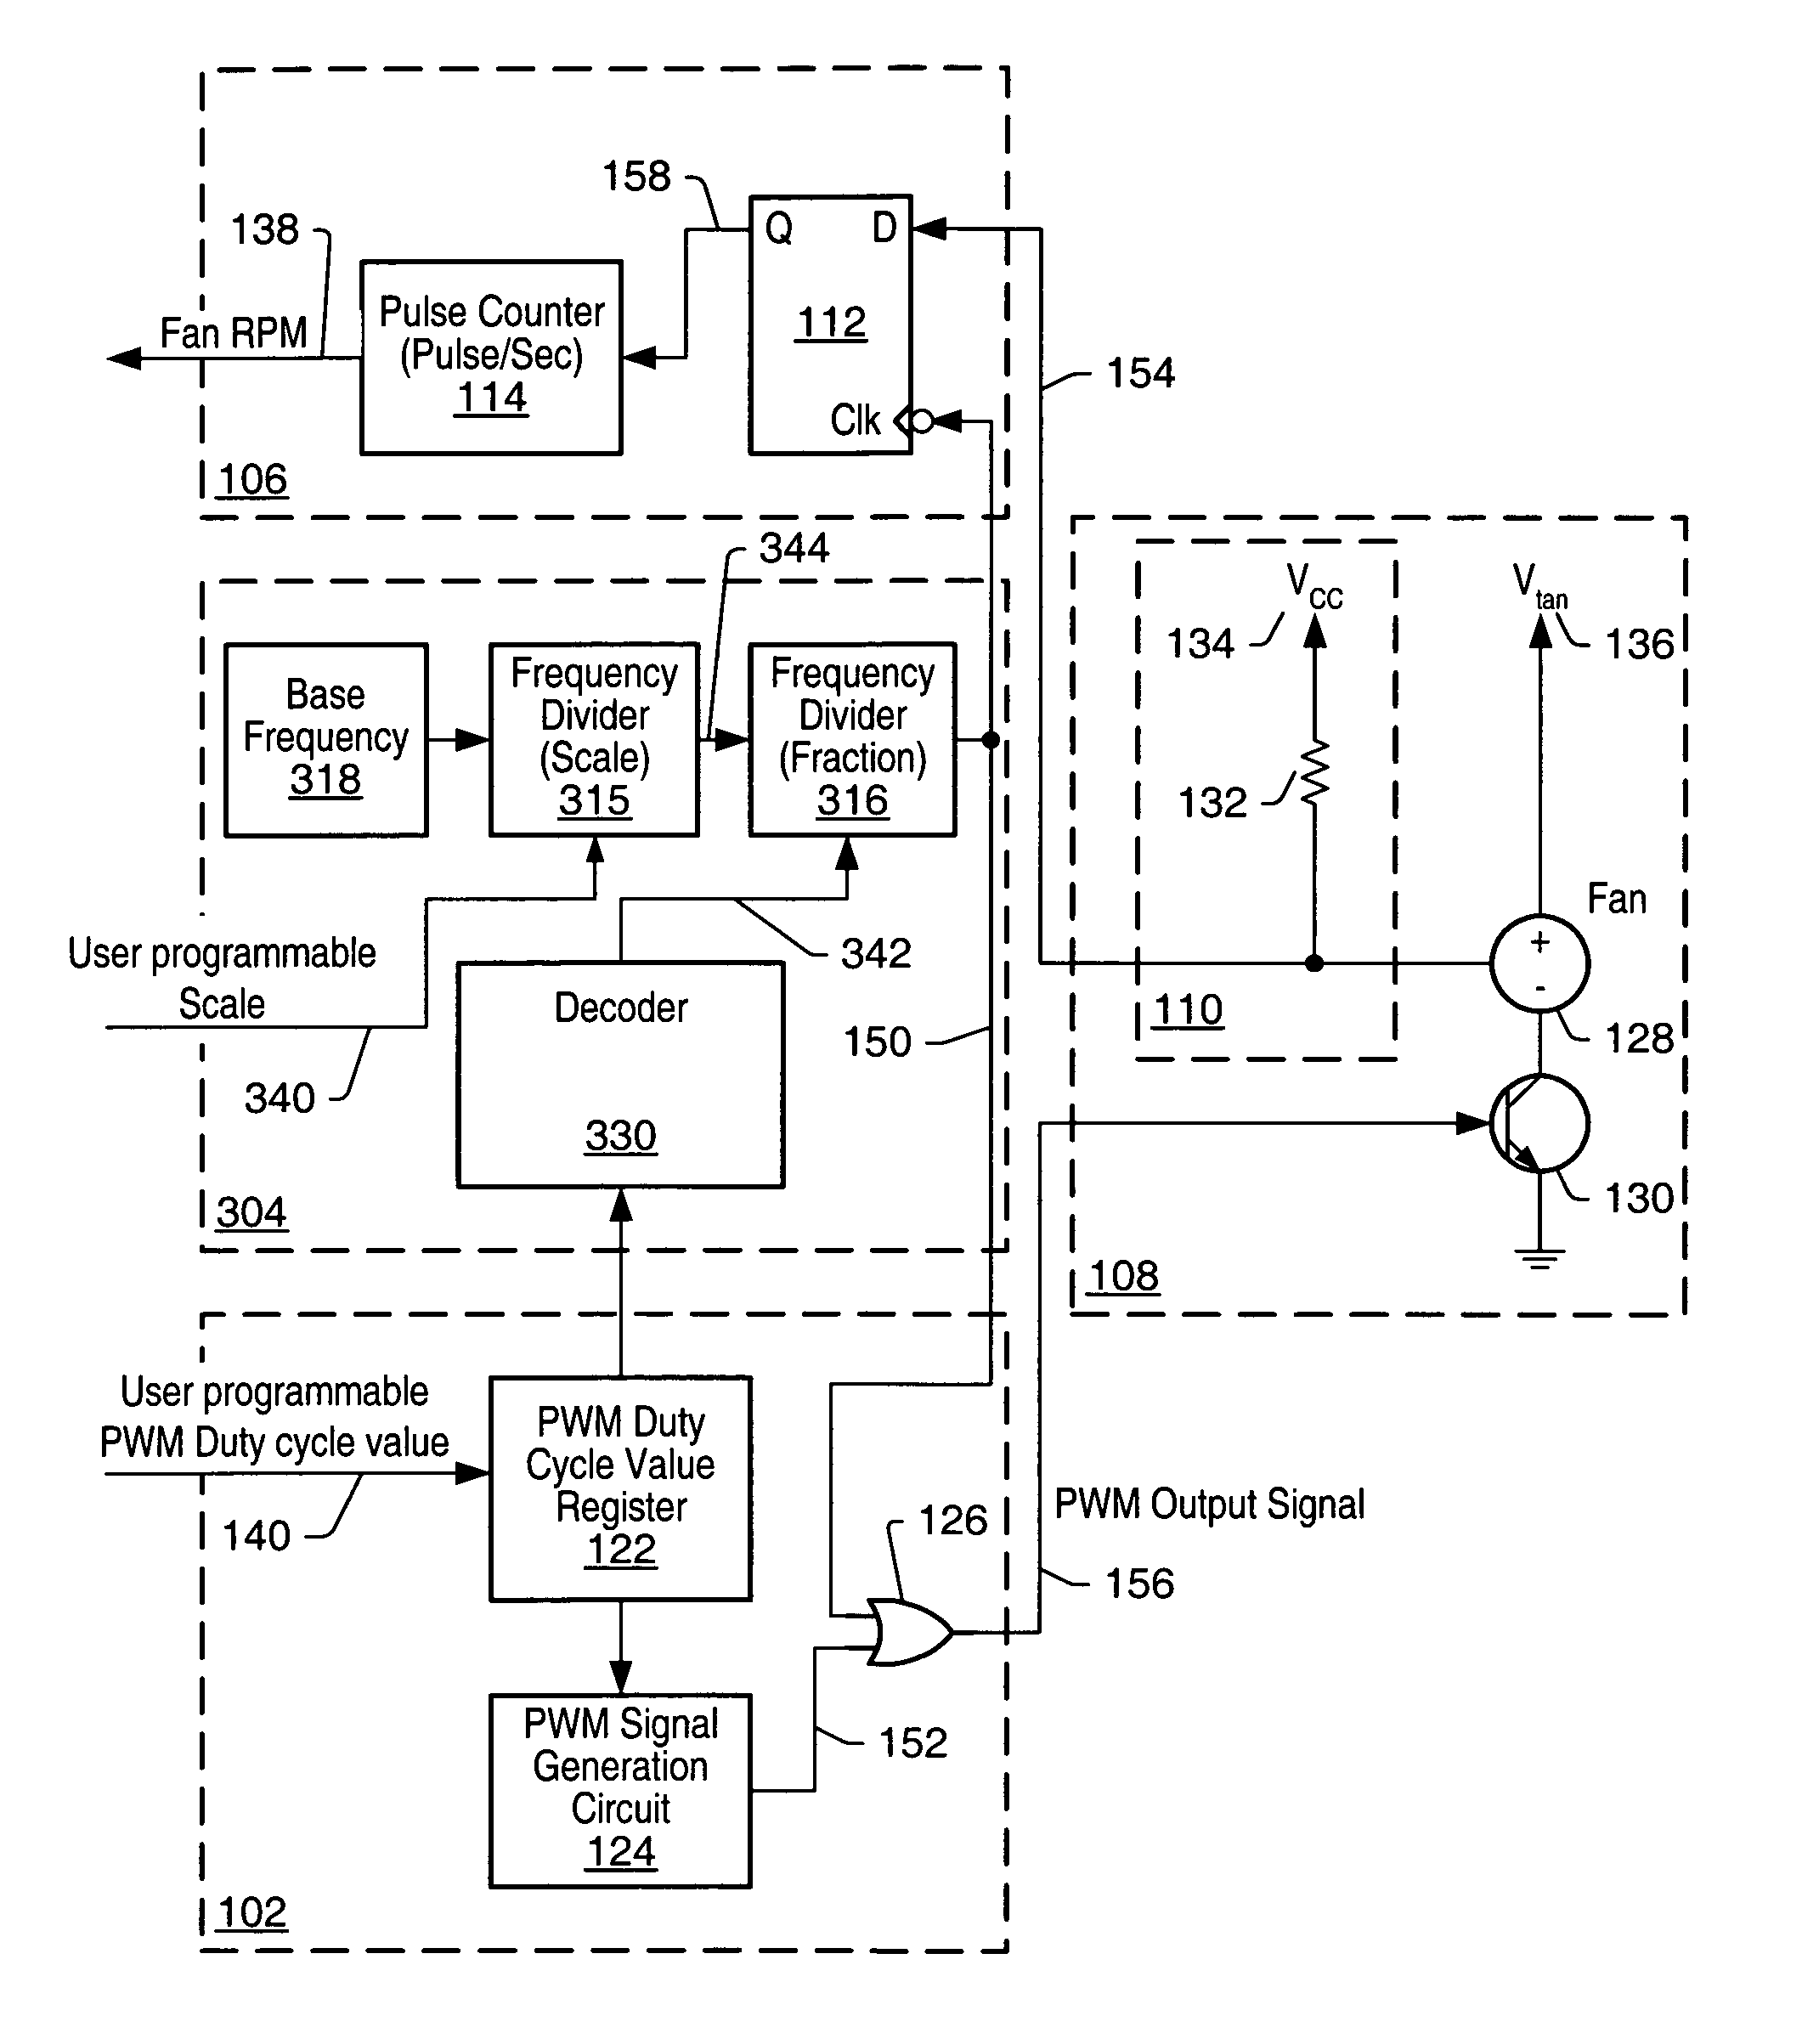 Method and apparatus for accurate fan tachometer readings of PWM fans with different speeds